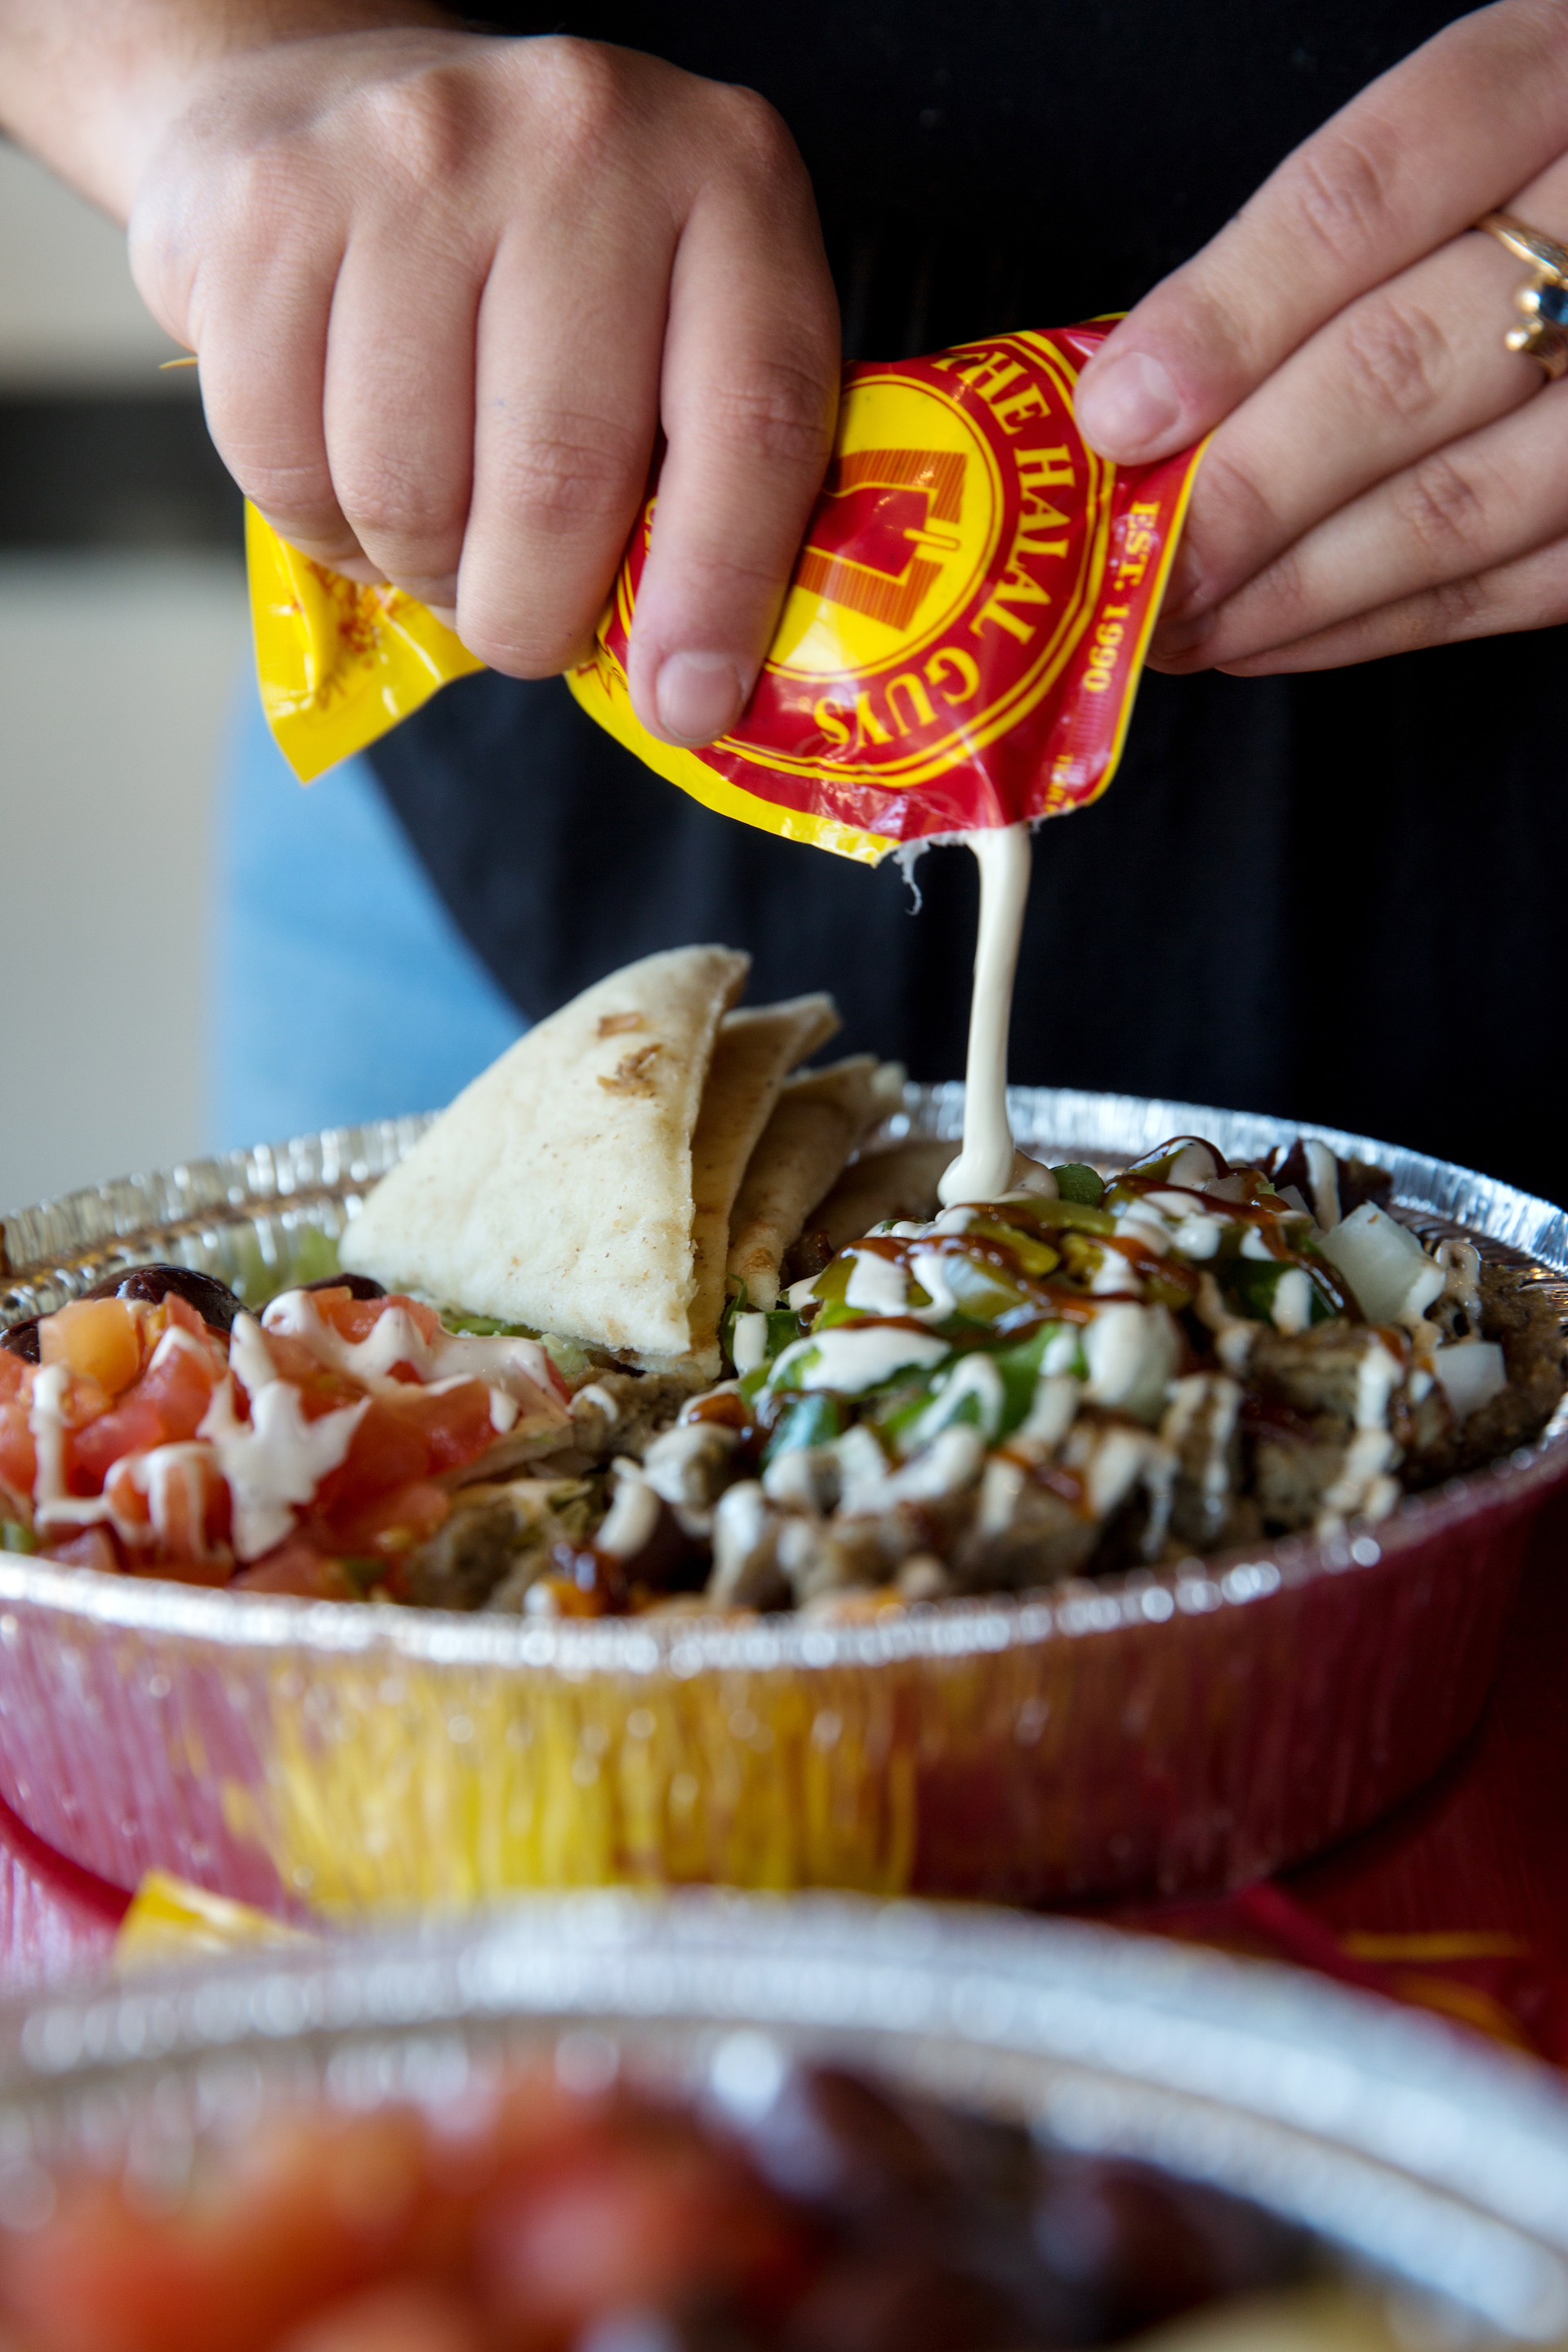 First Look: The Halal Guys bring Middle Eastern menu to Baton Rouge